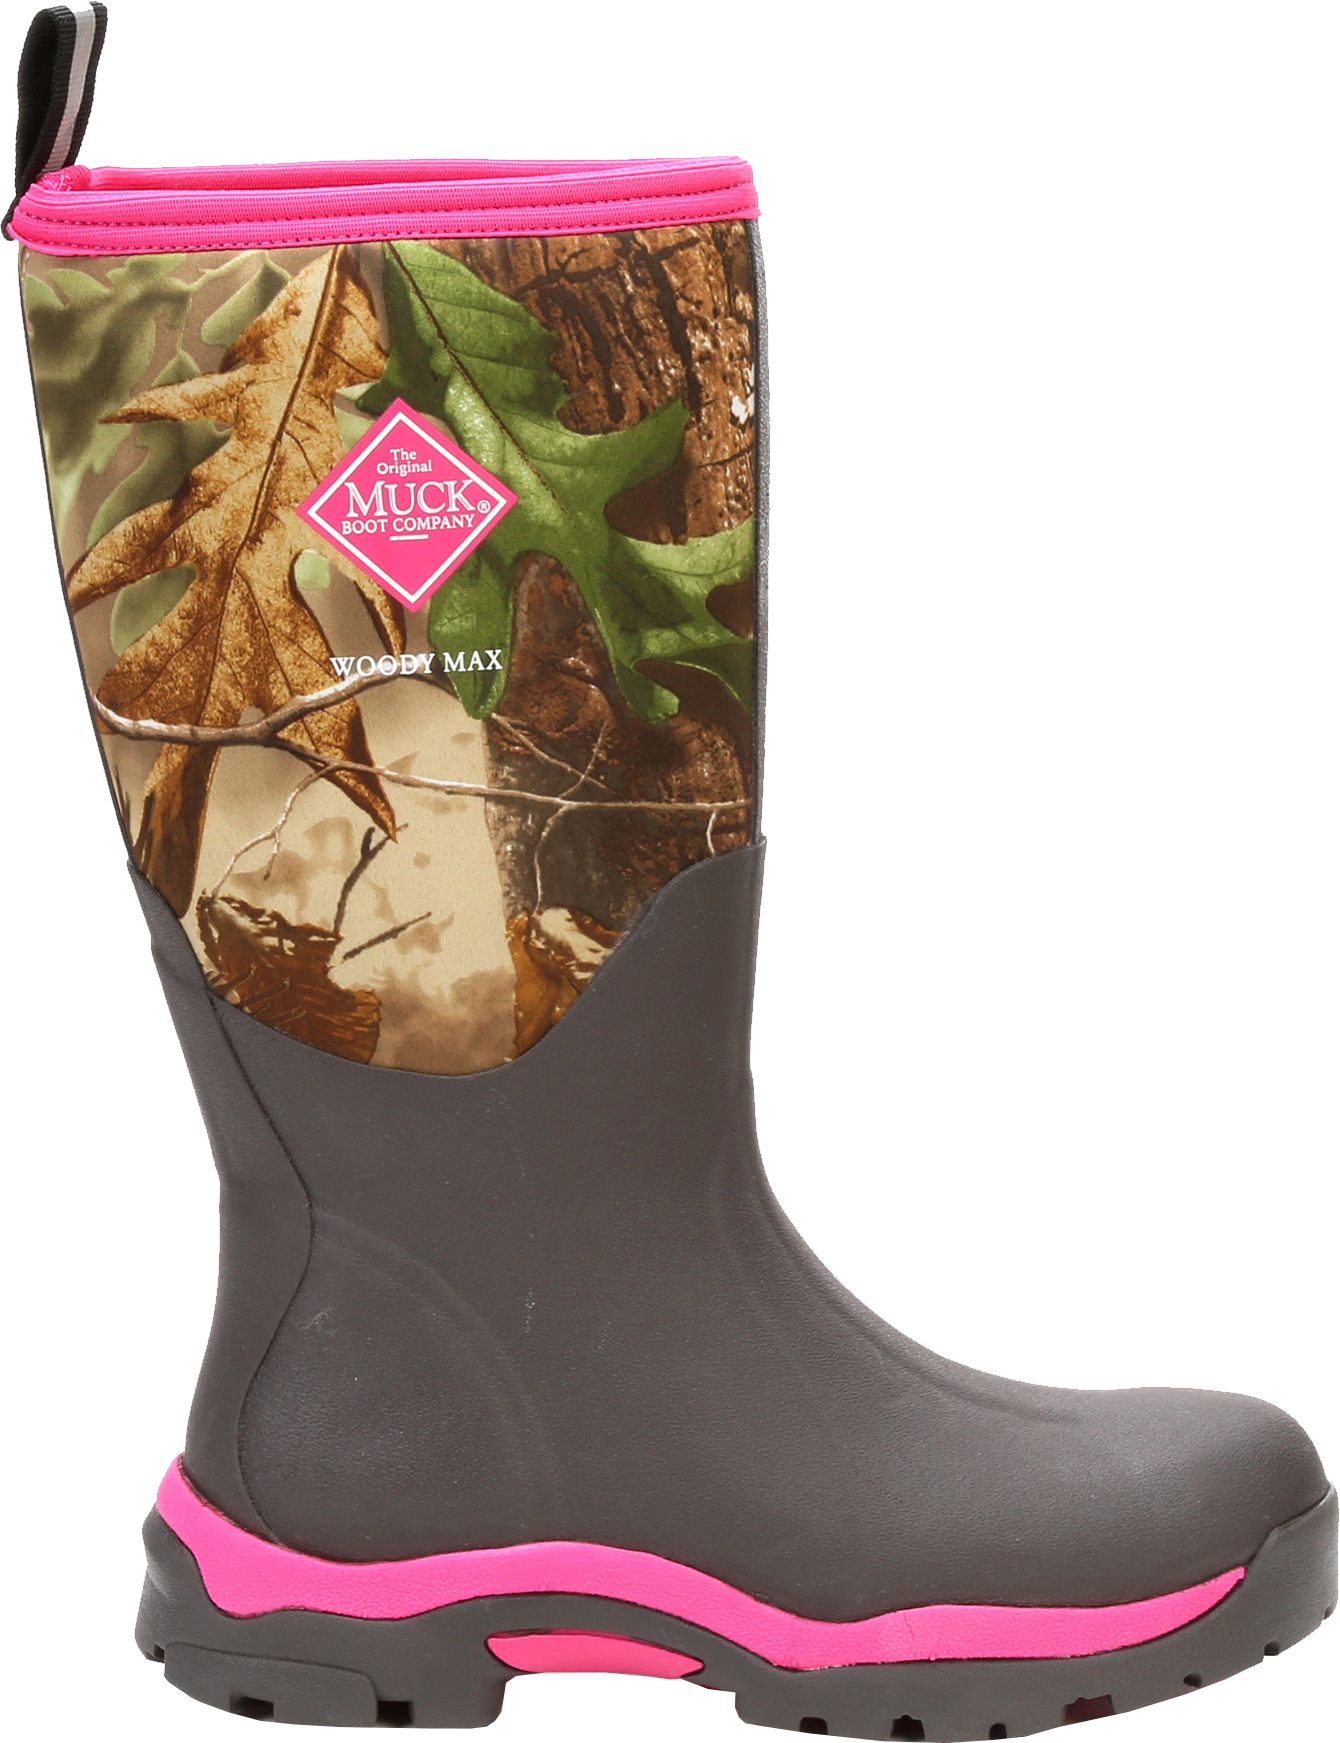 Muck Boots Women's Woody Max Rubber Hunting Boots | Field & Stream